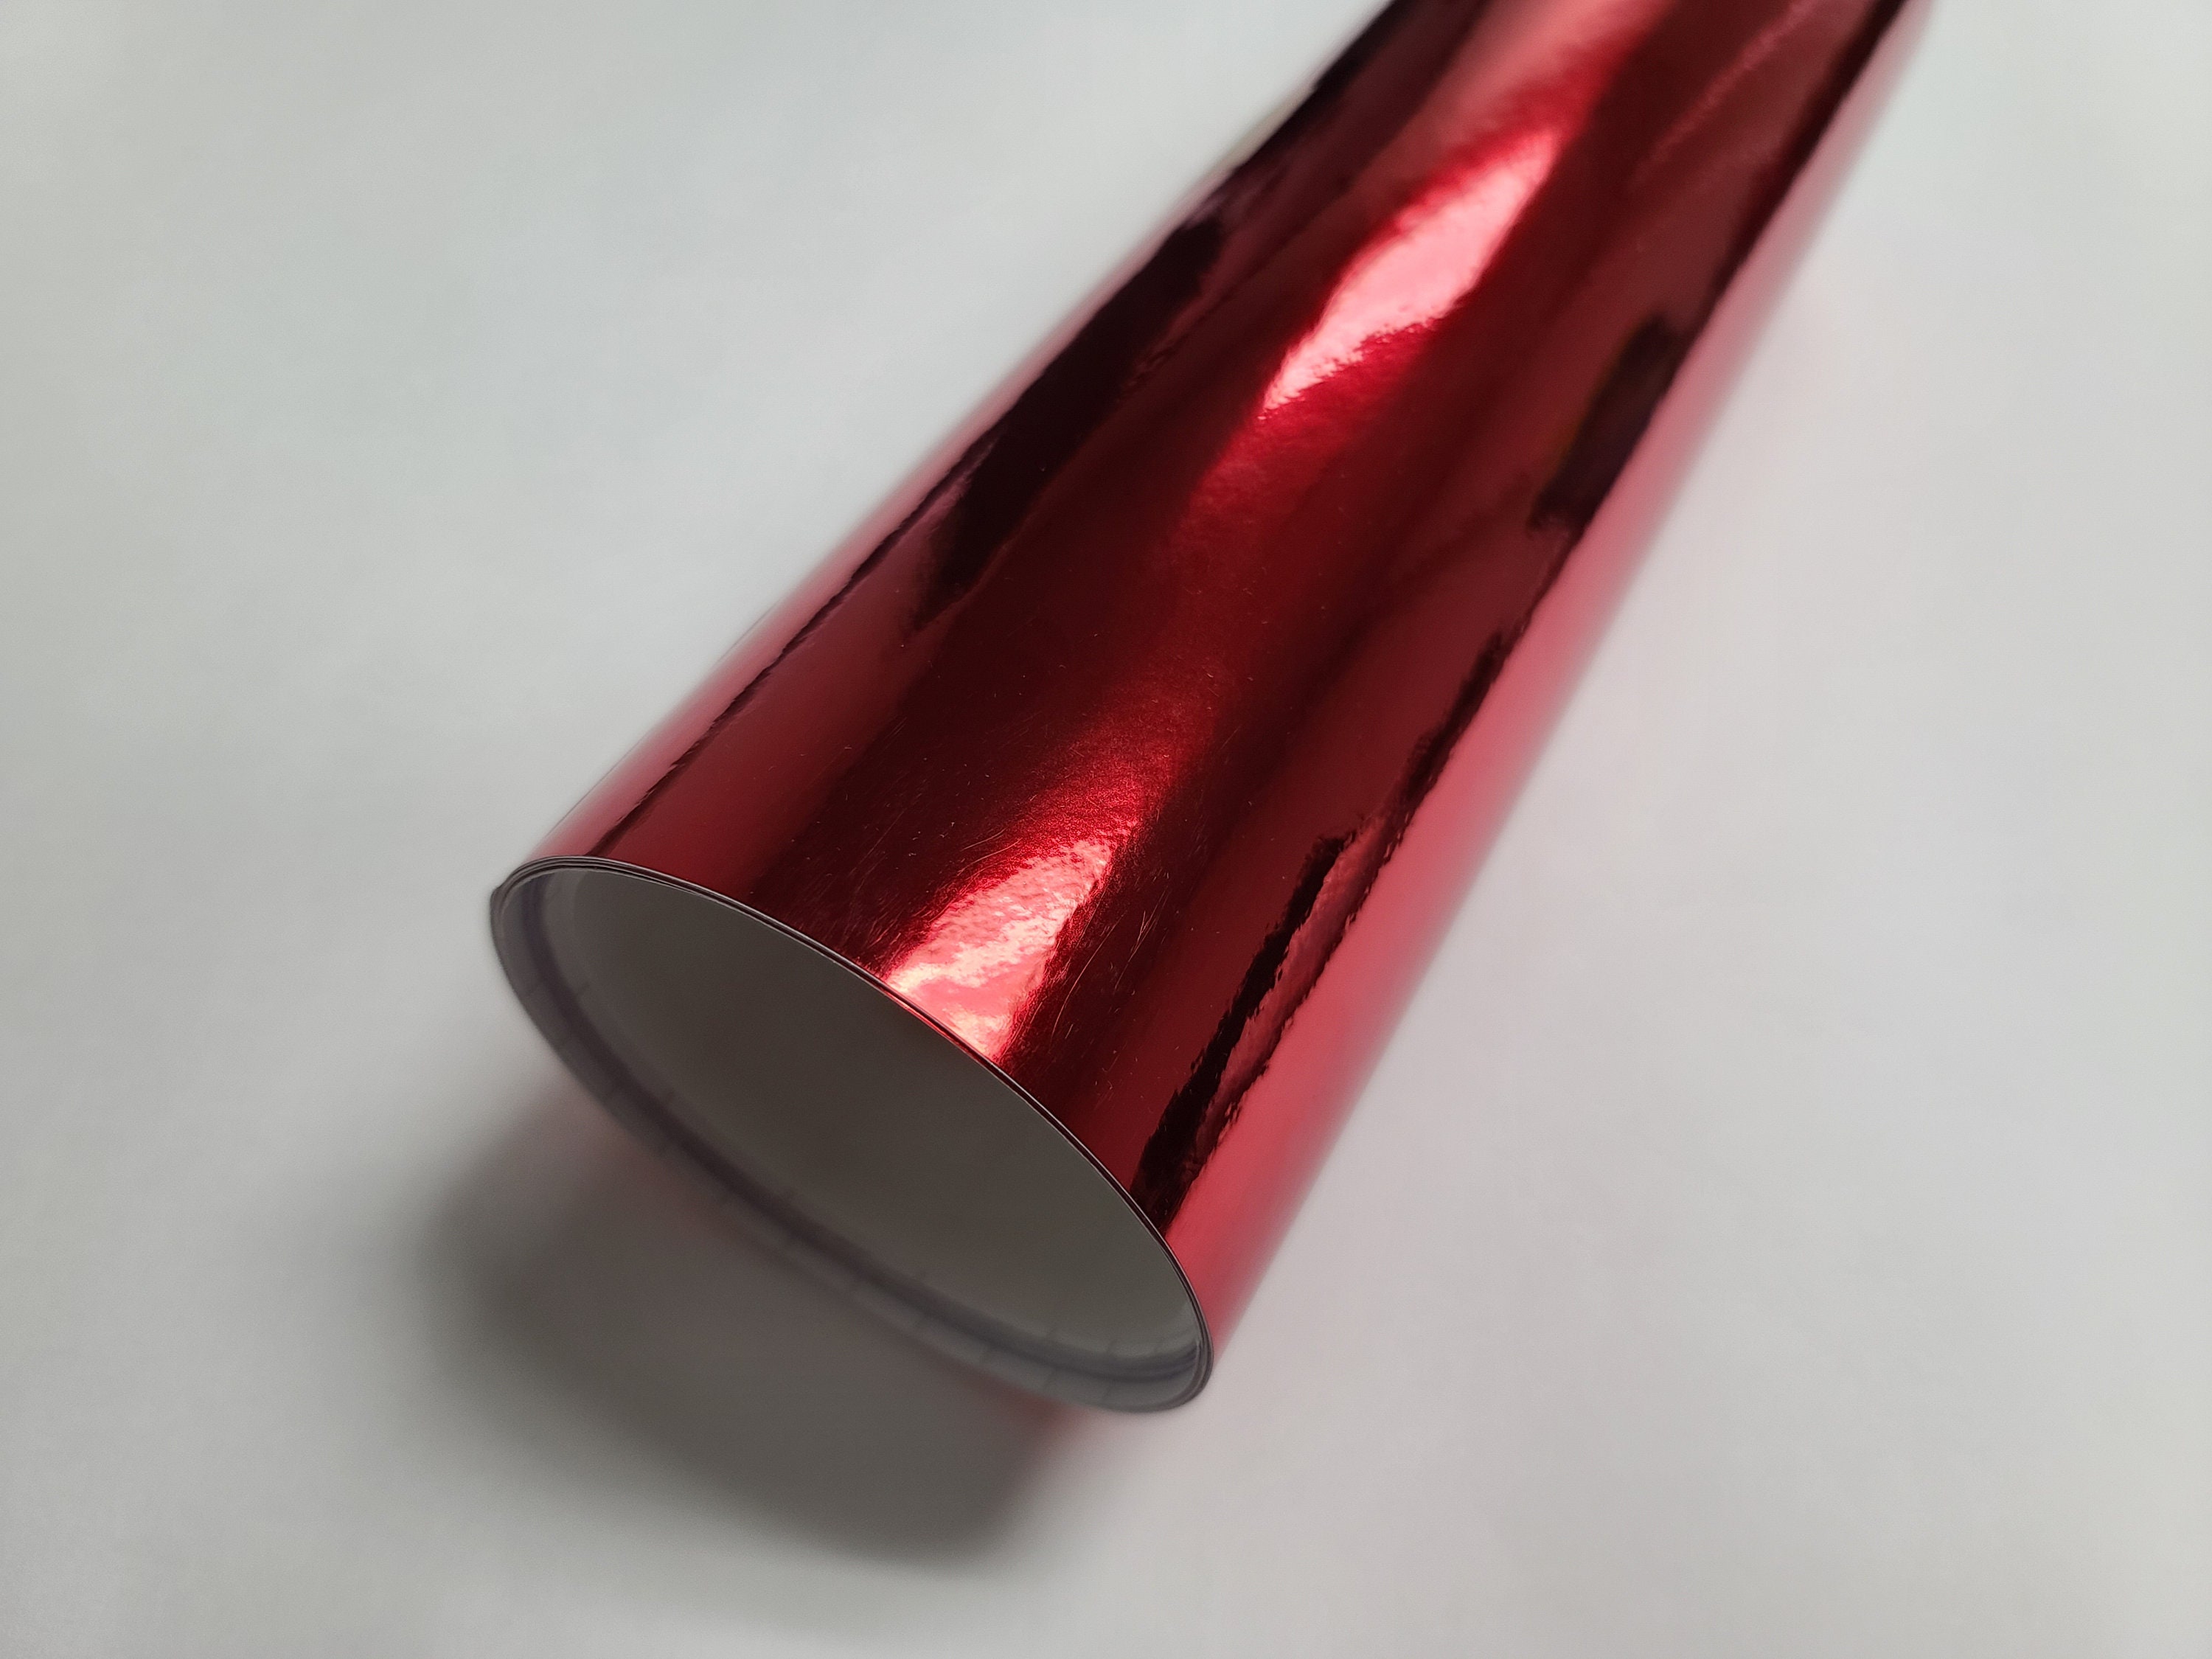 Glossy Gold Chrome Mirror Vinyl Roll or Sheets - Permanent Holographic  Vinyl perfect for Cricut, Silhouette, and Craft Cutters